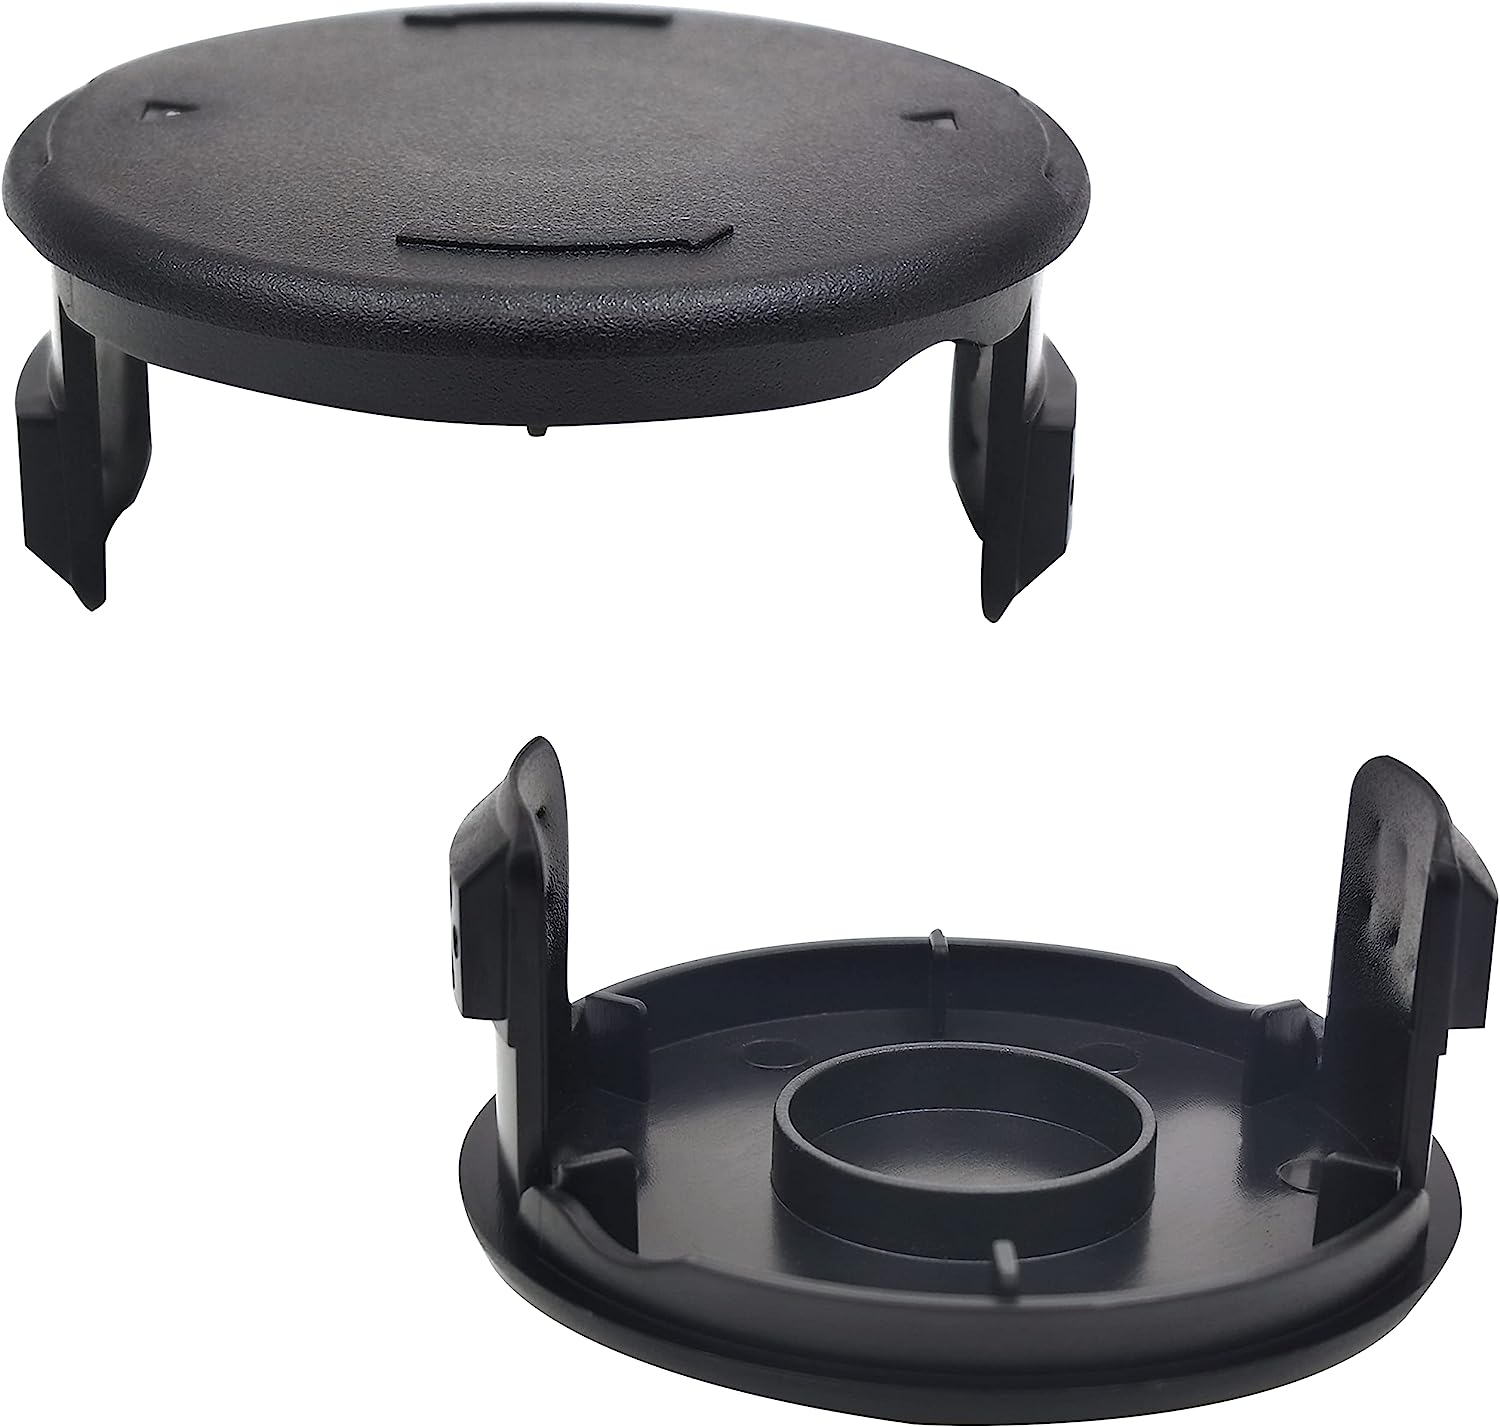 QUASION Weed Eater Spool Cap Cover for Hyper Tough [...]